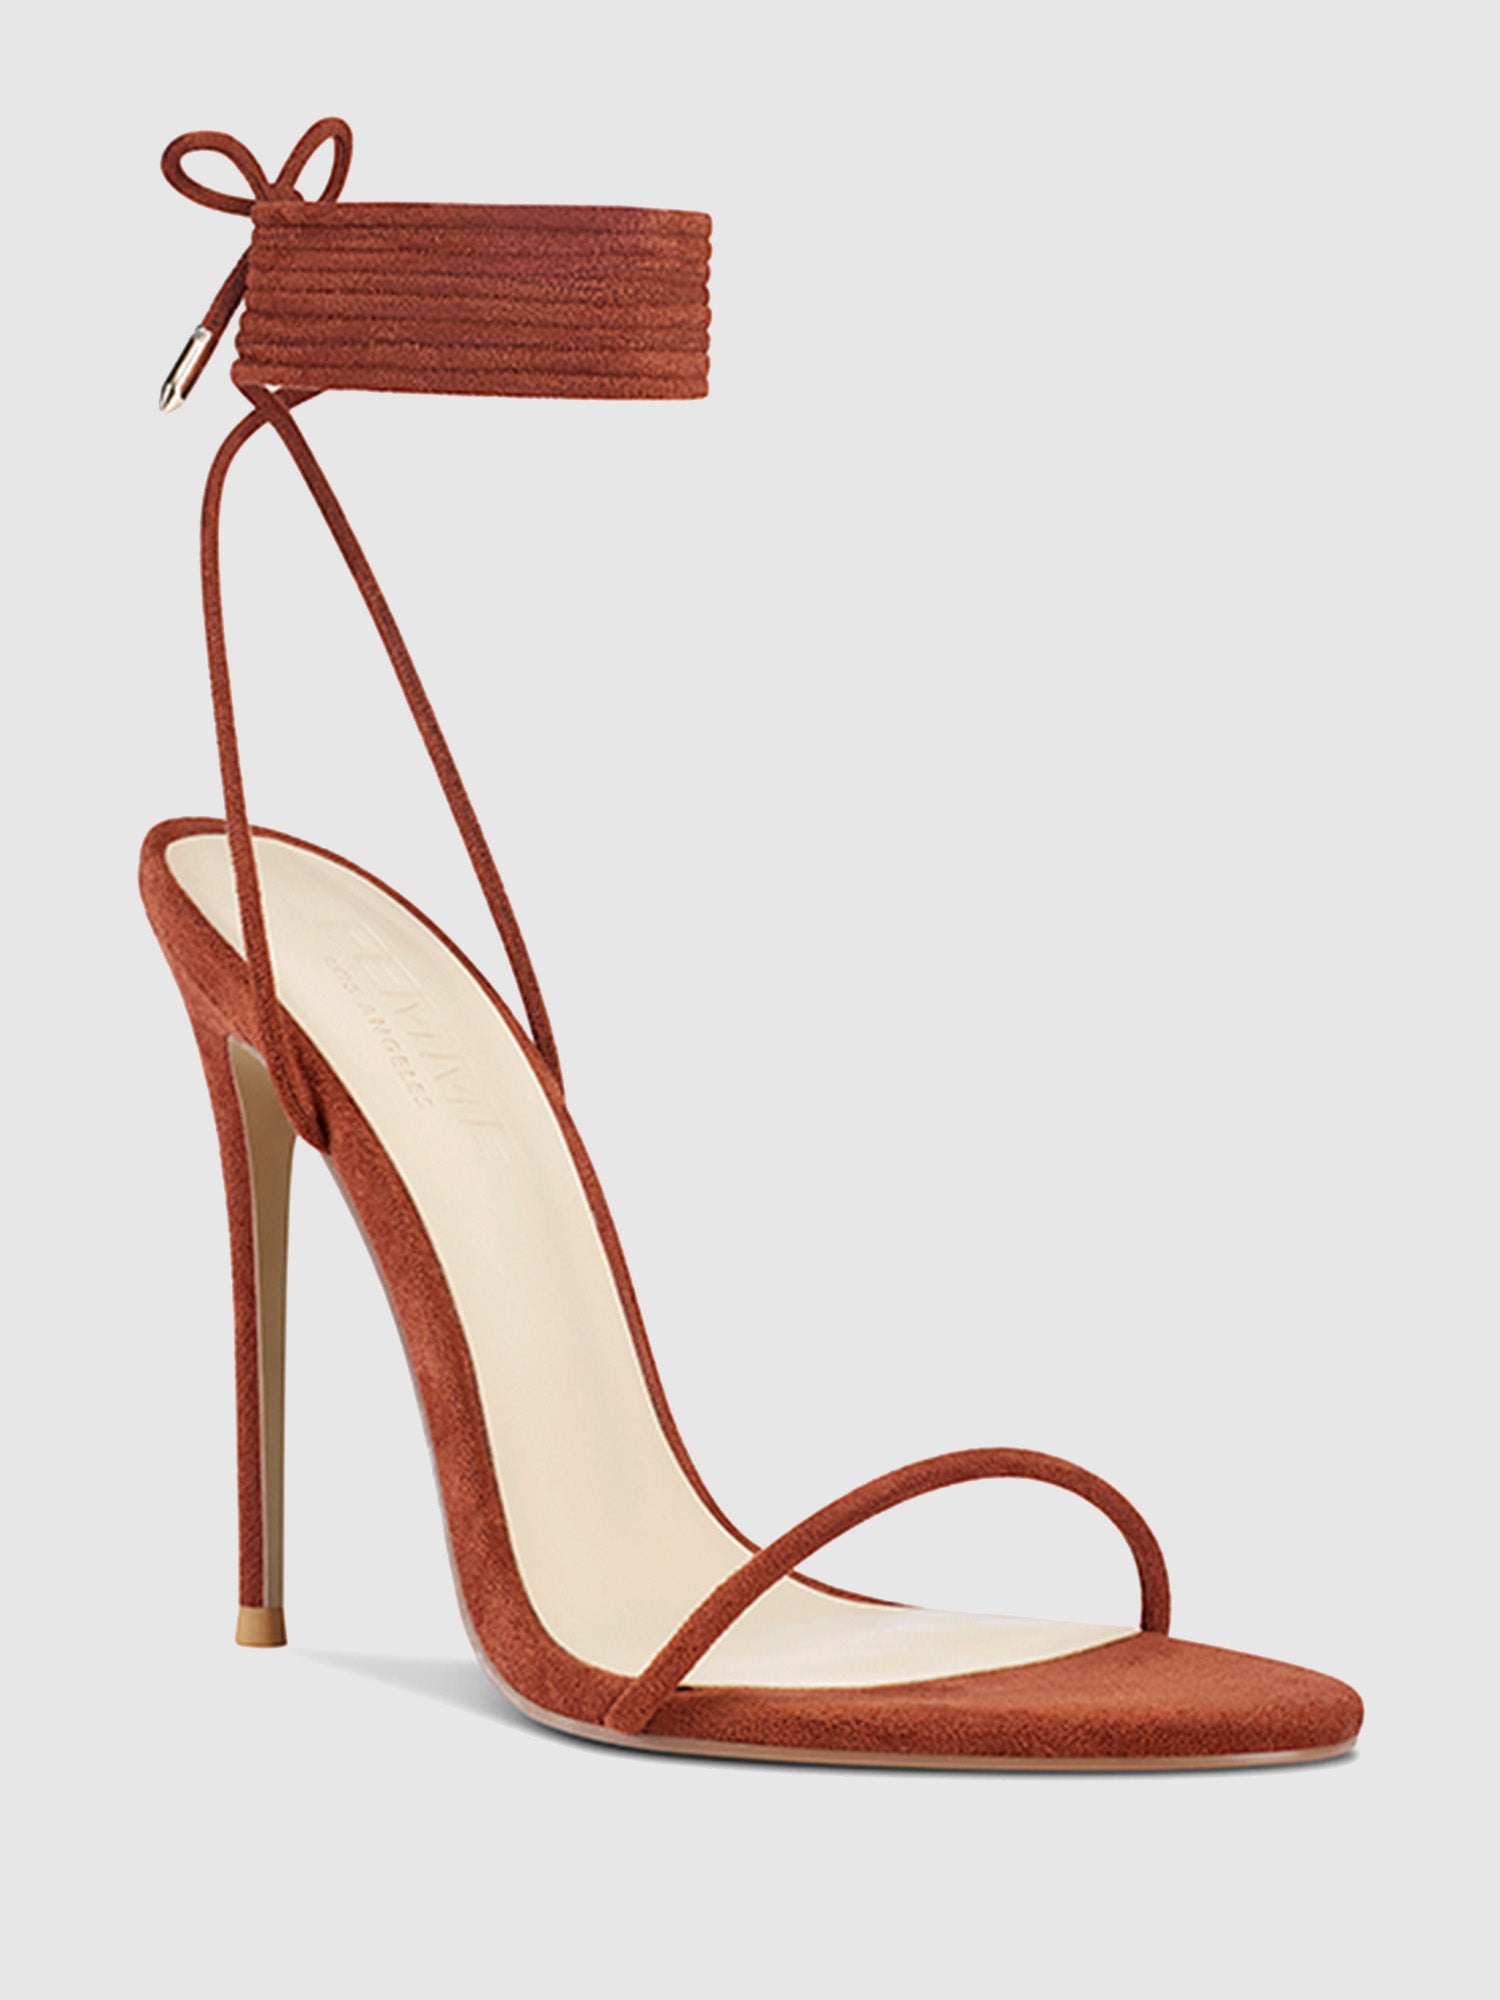 Brown Satin Ankle Strap Heels Sandals|FSJshoes